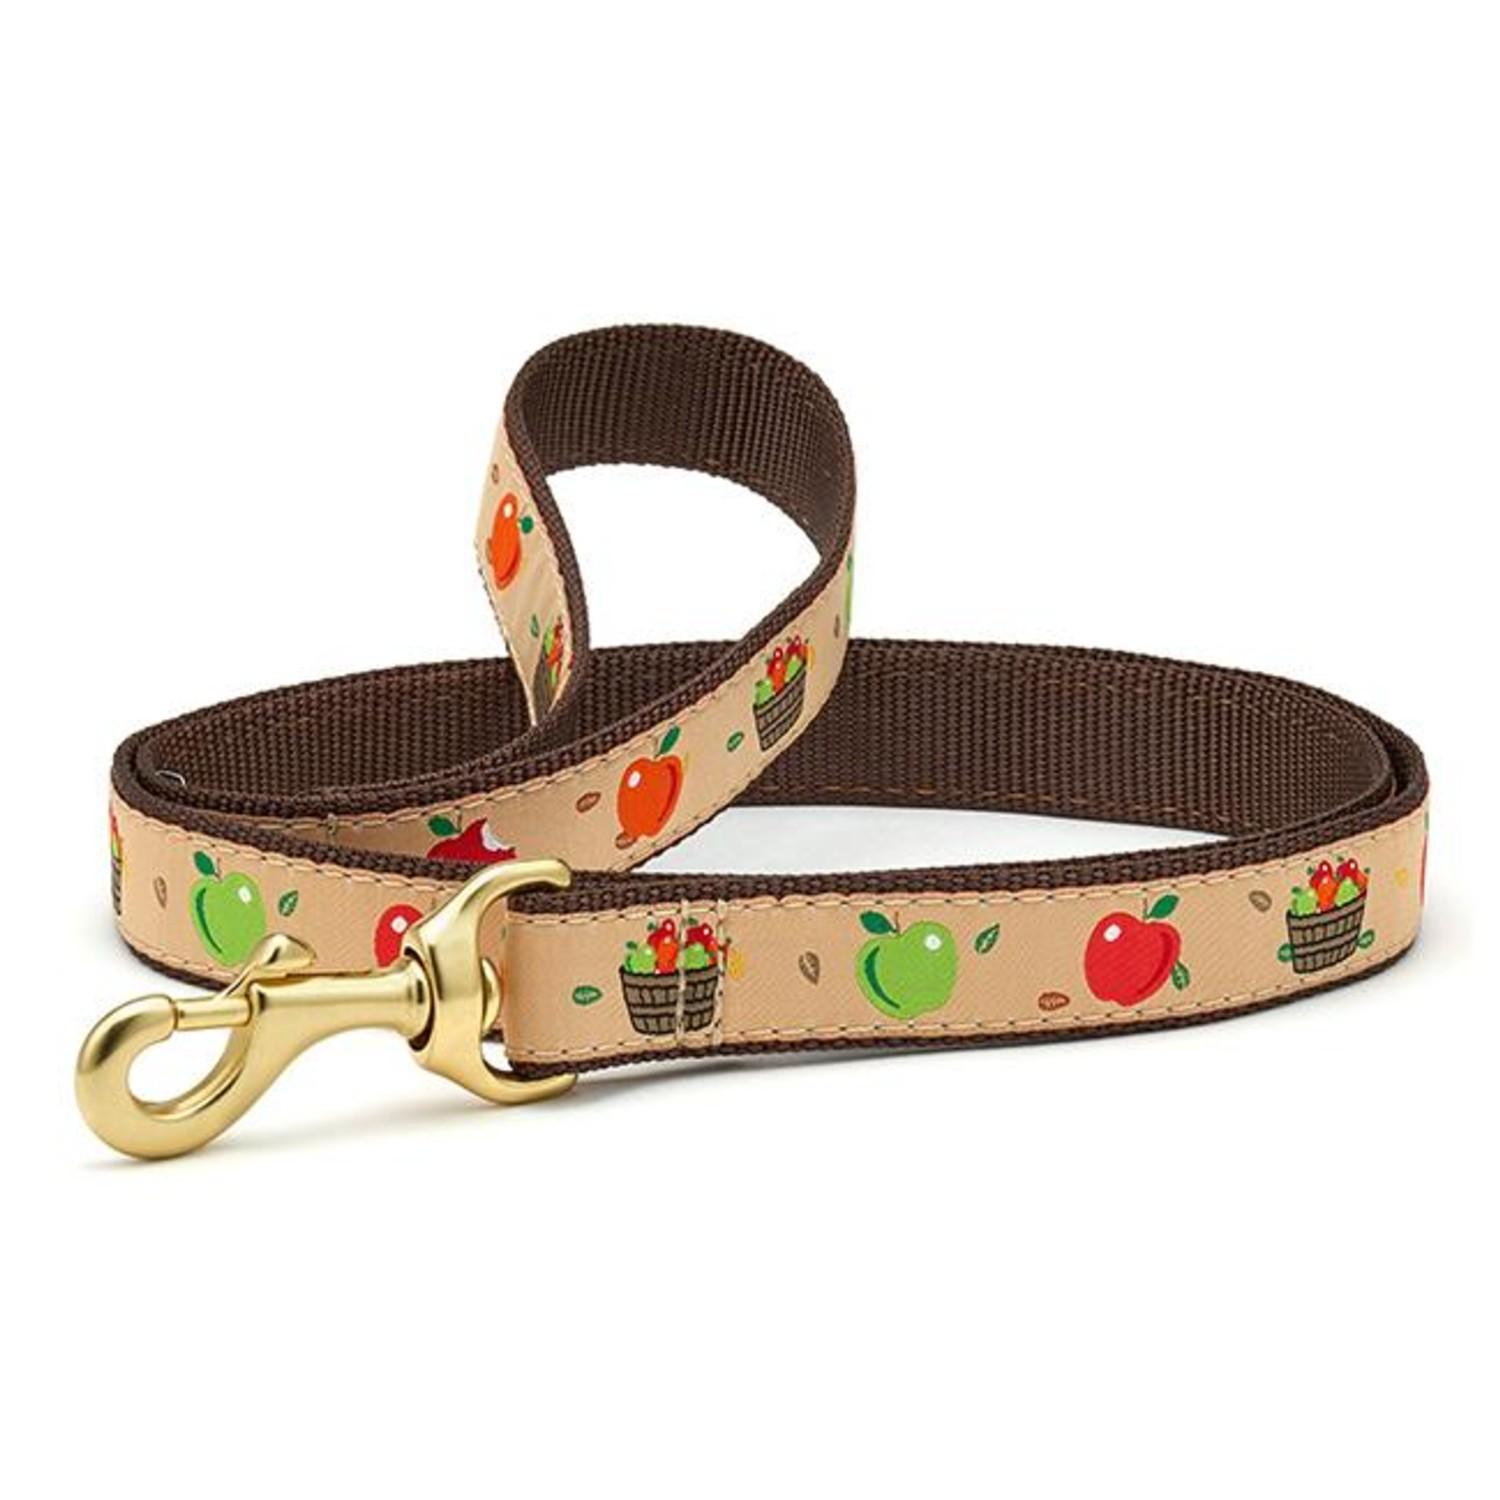 Apple of My Eye Dog Leash by Up Country